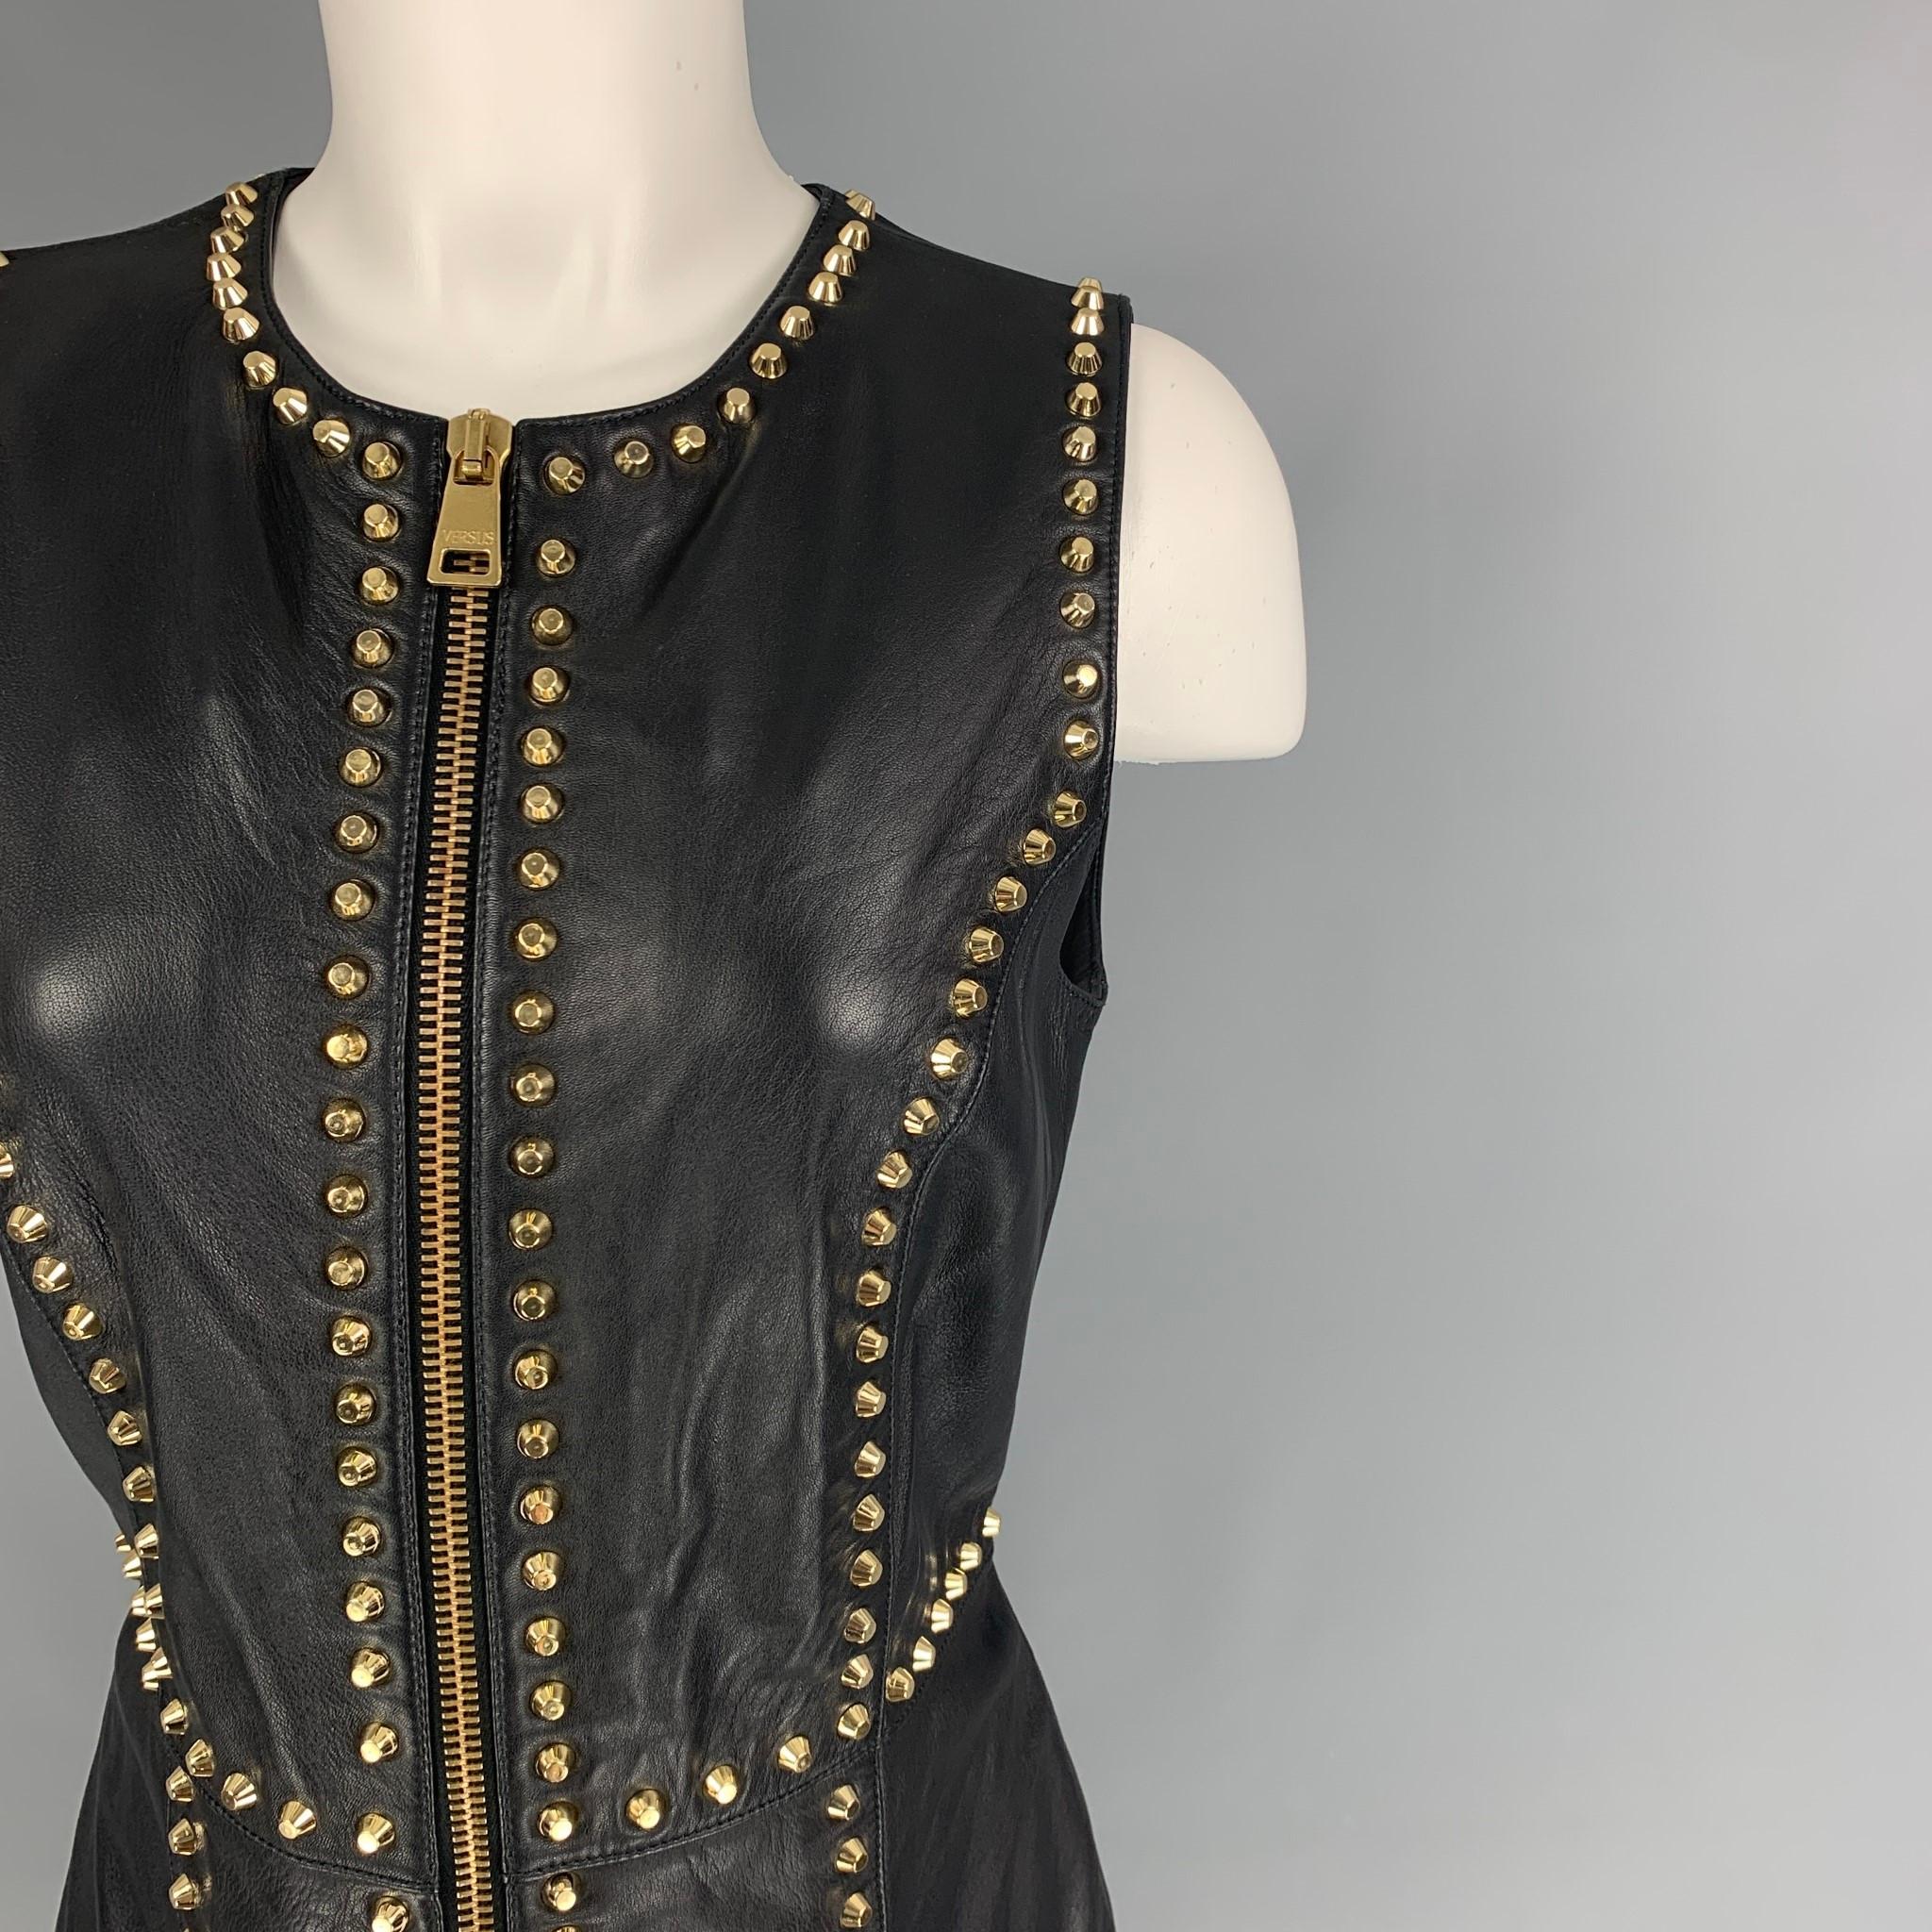 VERSUS by GIANNI VERSACE mini dress comes in a black leather featuring gold tone studded details throughout, sleeveless, and a front zipper closure. 

Very Good Pre-Owned Condition.
Marked: 42

Measurements:

Shoulder: 13 in.
Bust: 32 in.
Waist: 29